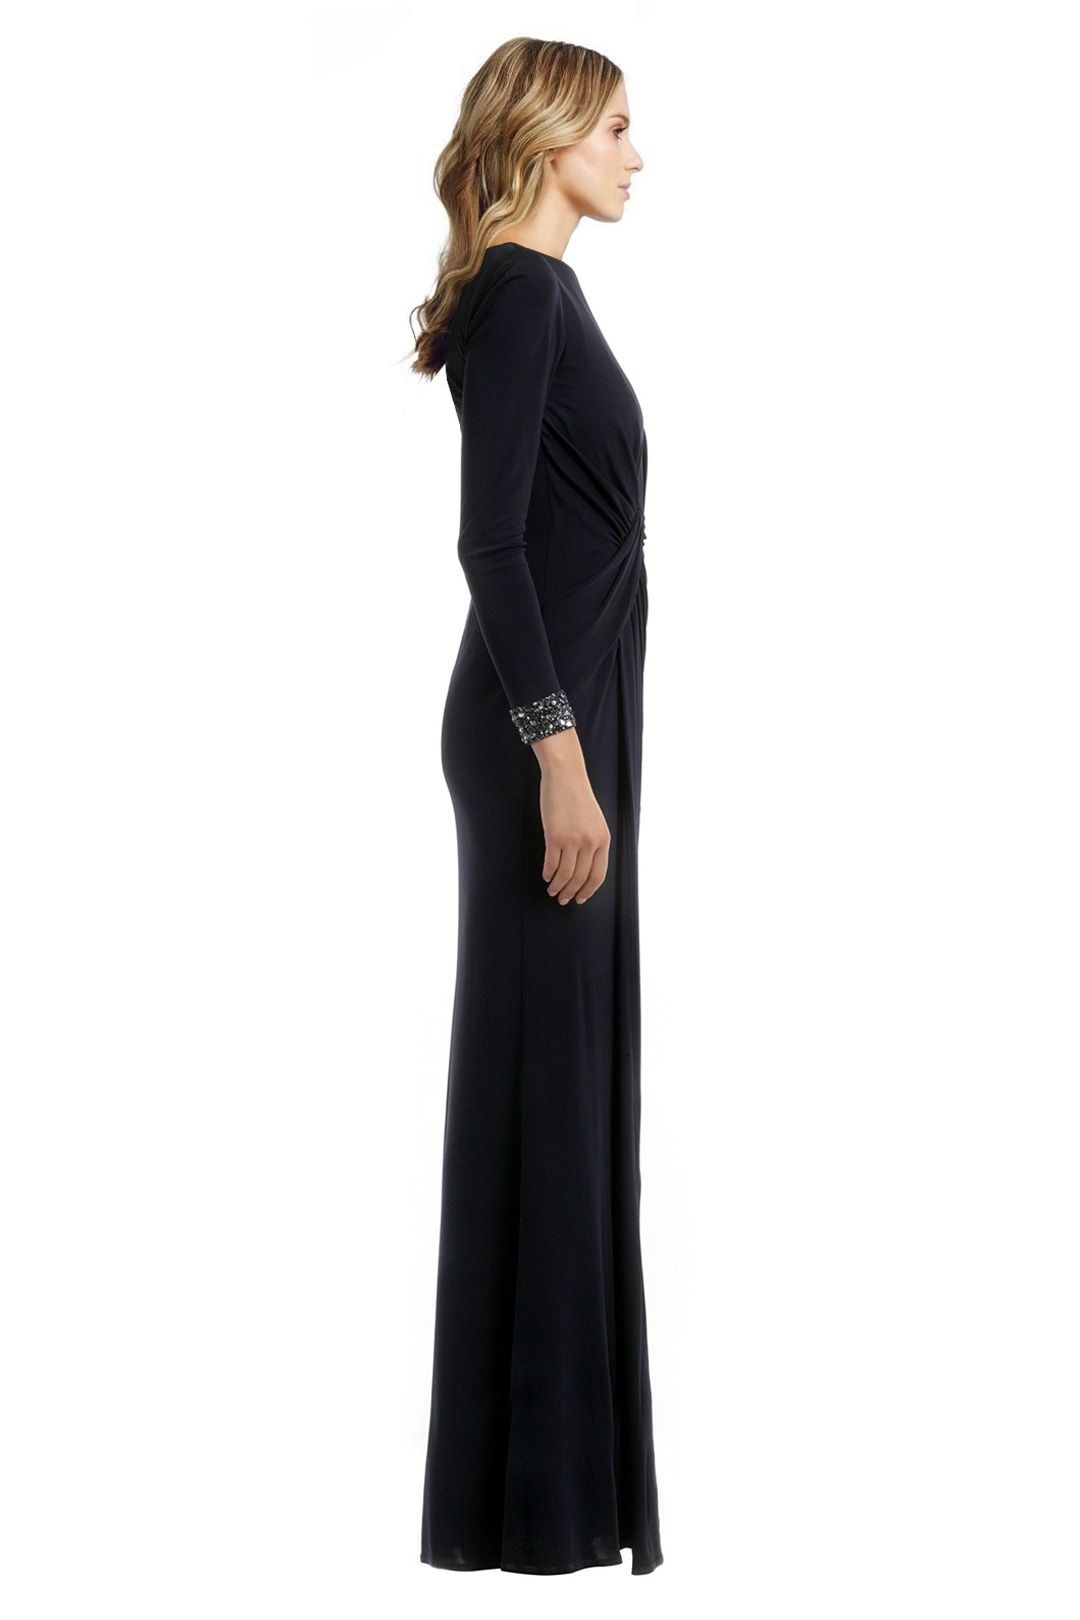 David Meister - Cuff Out Back Gown  - Navy - Side